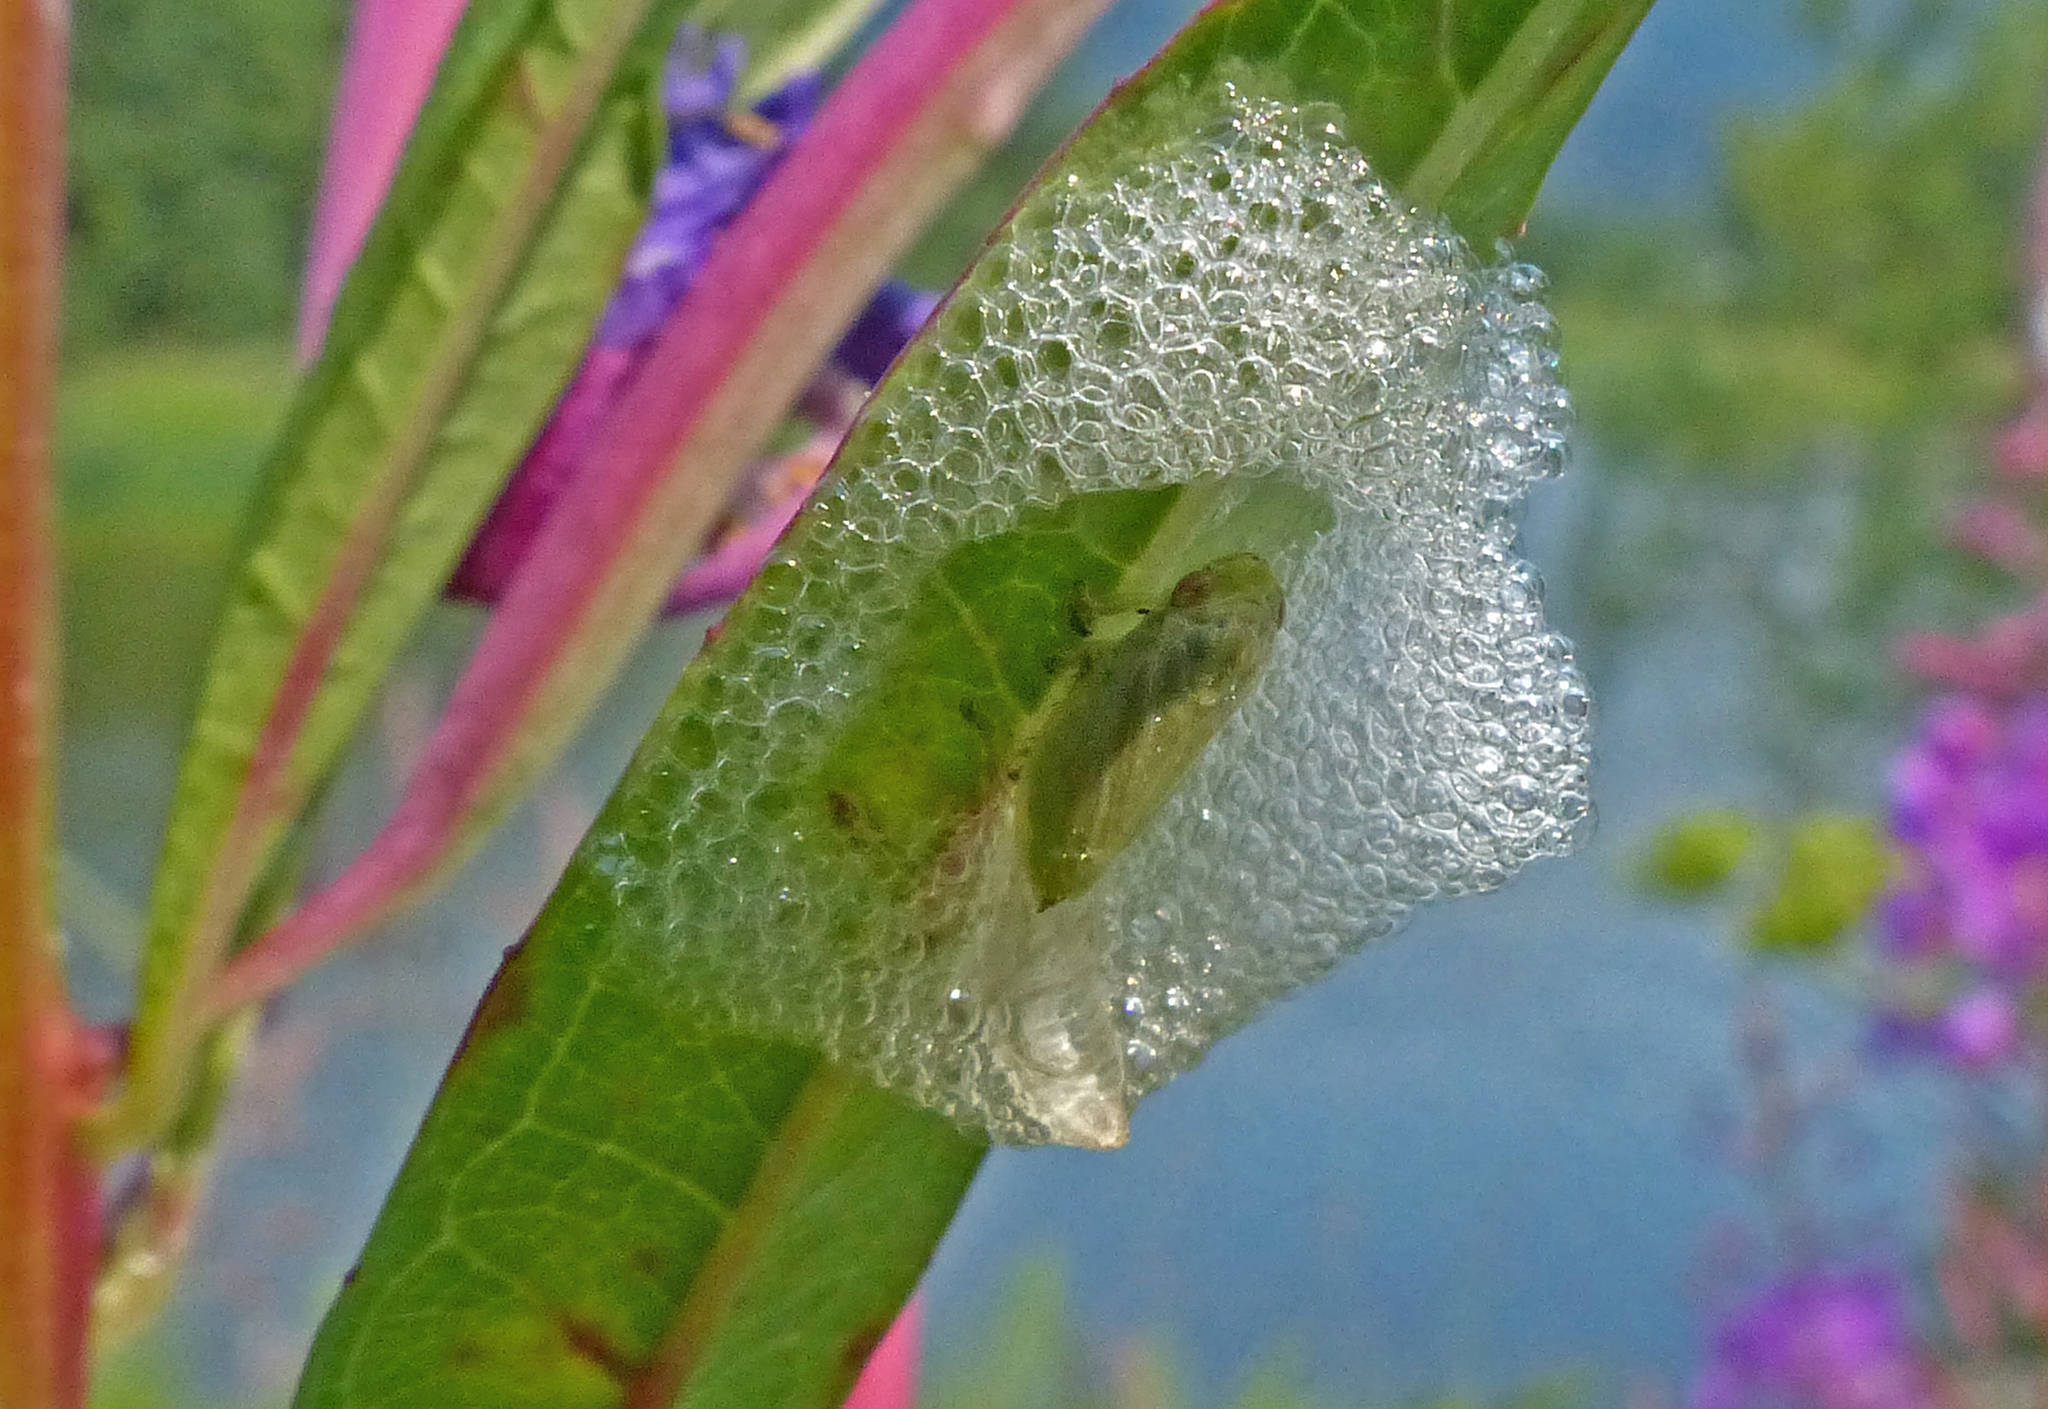 A spittlebug nymph inside its spittle. (Photo by Bob Armstrong)